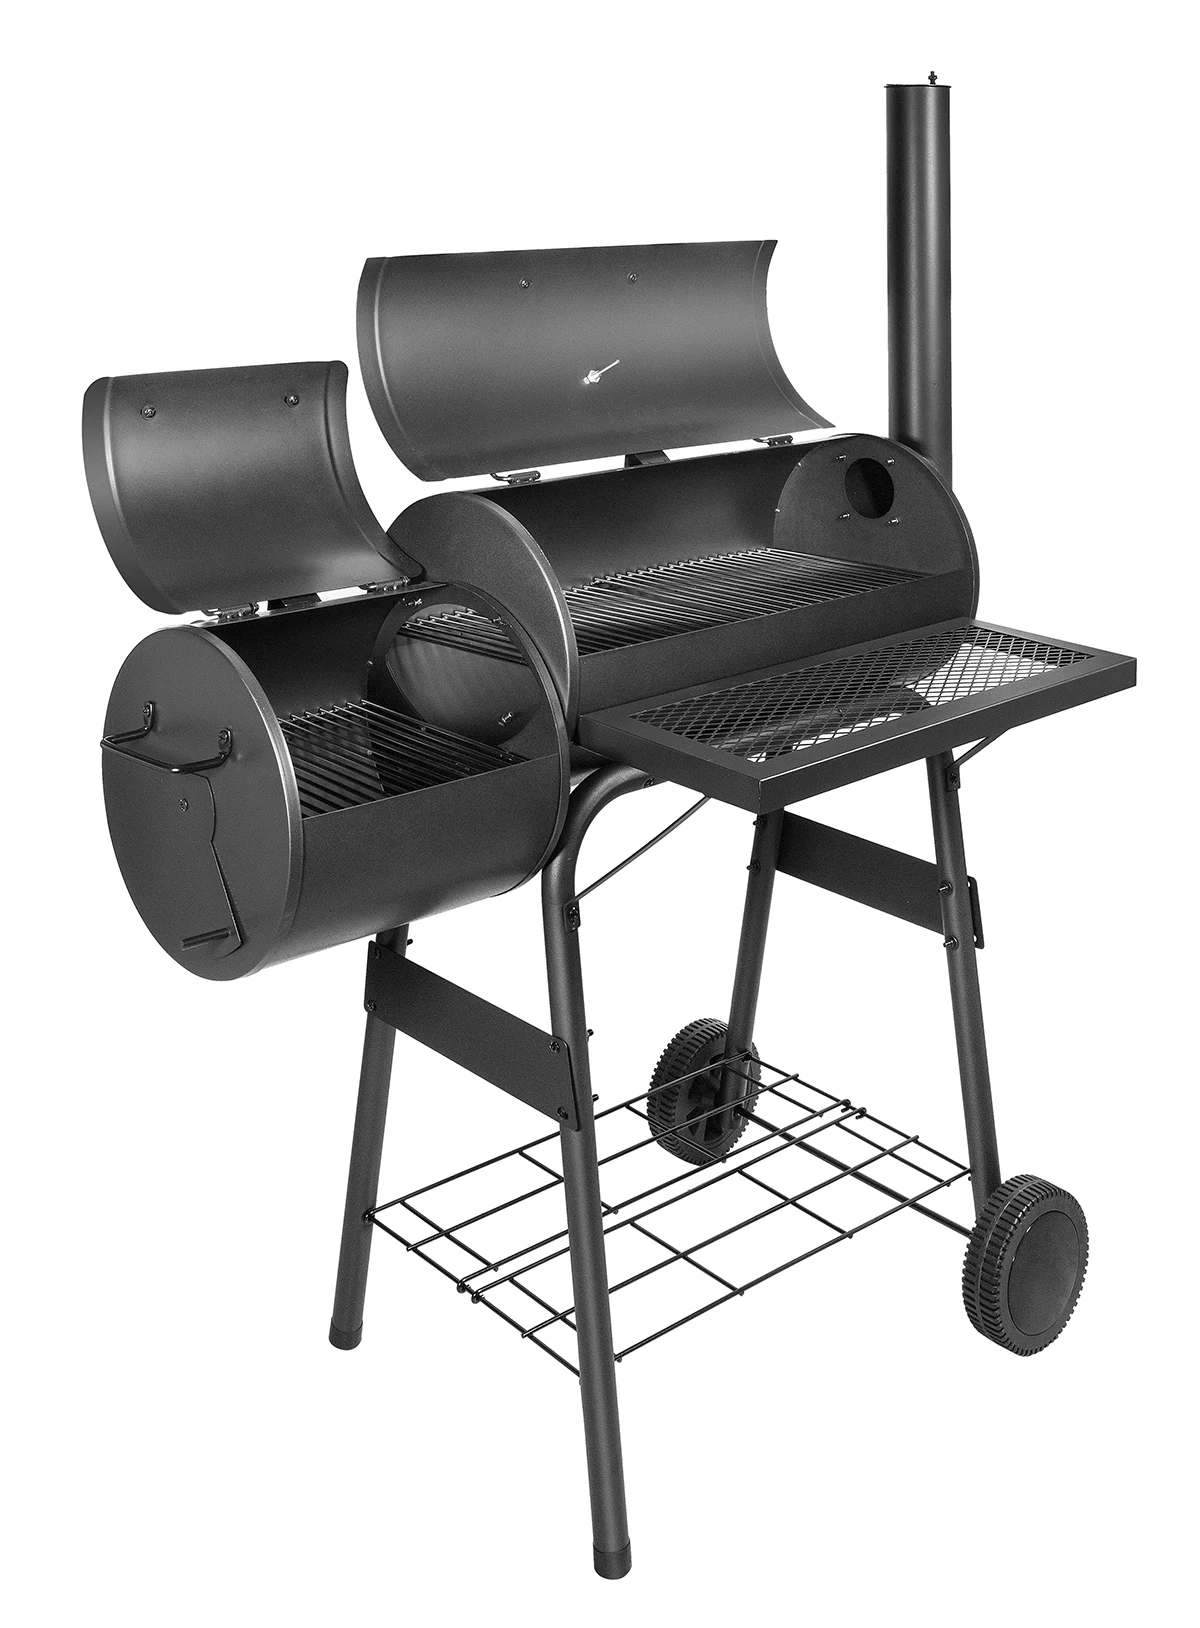 Amazon Black Outdoor Grill Photography